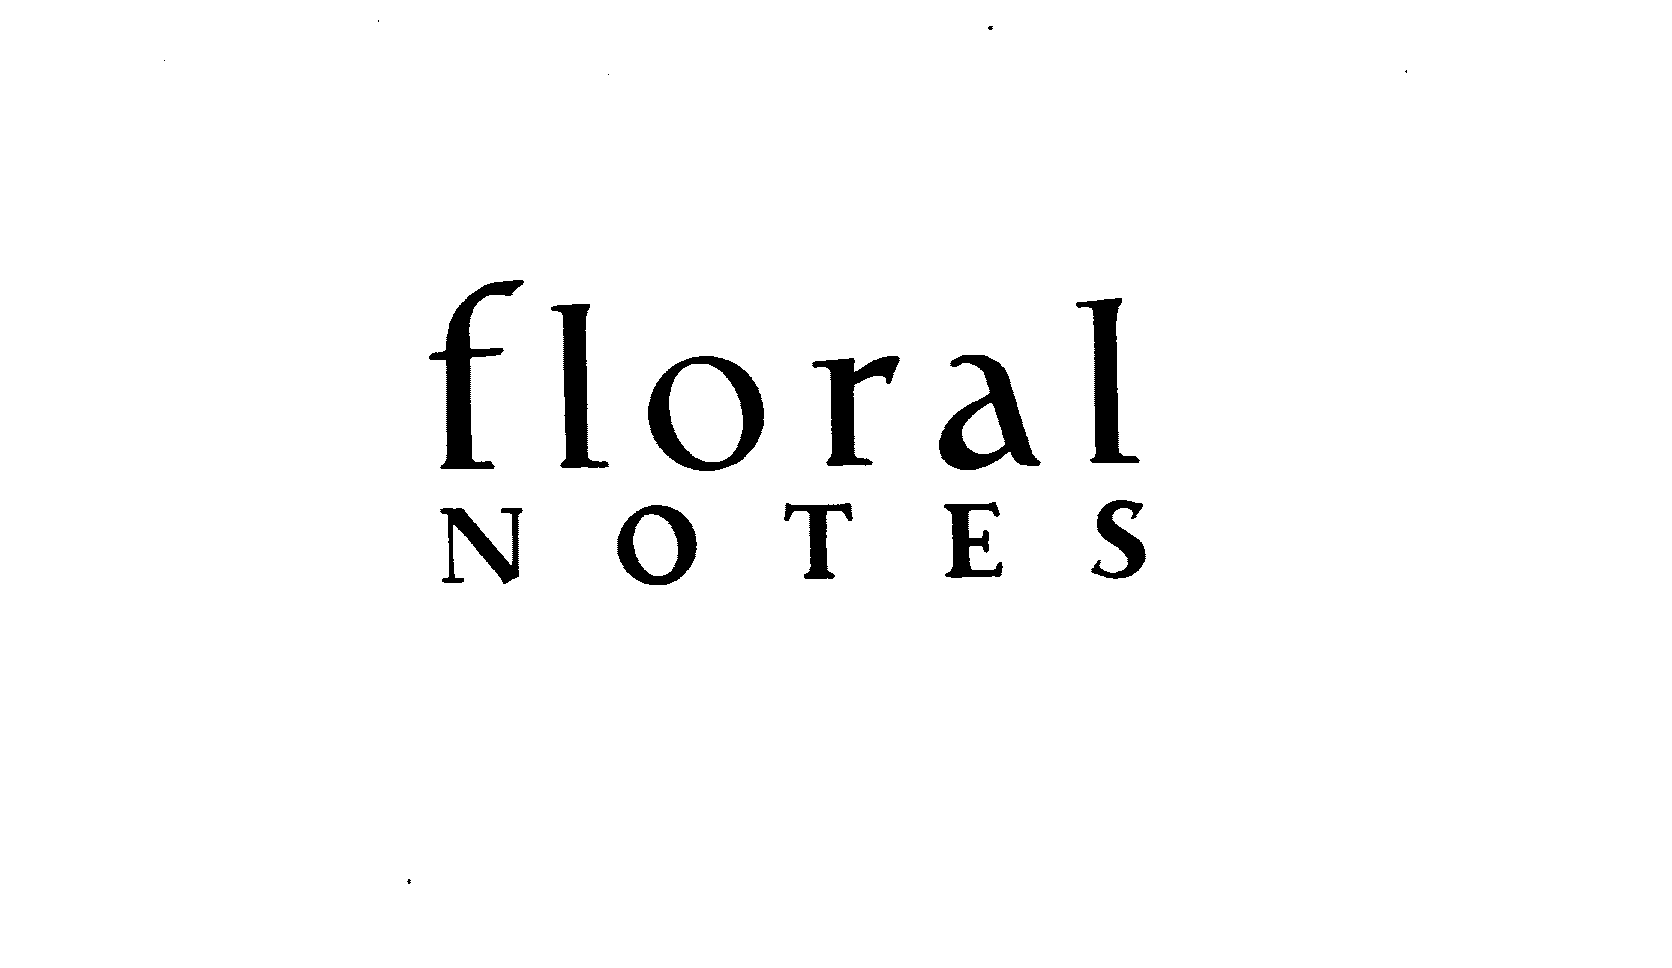  FLORAL NOTES